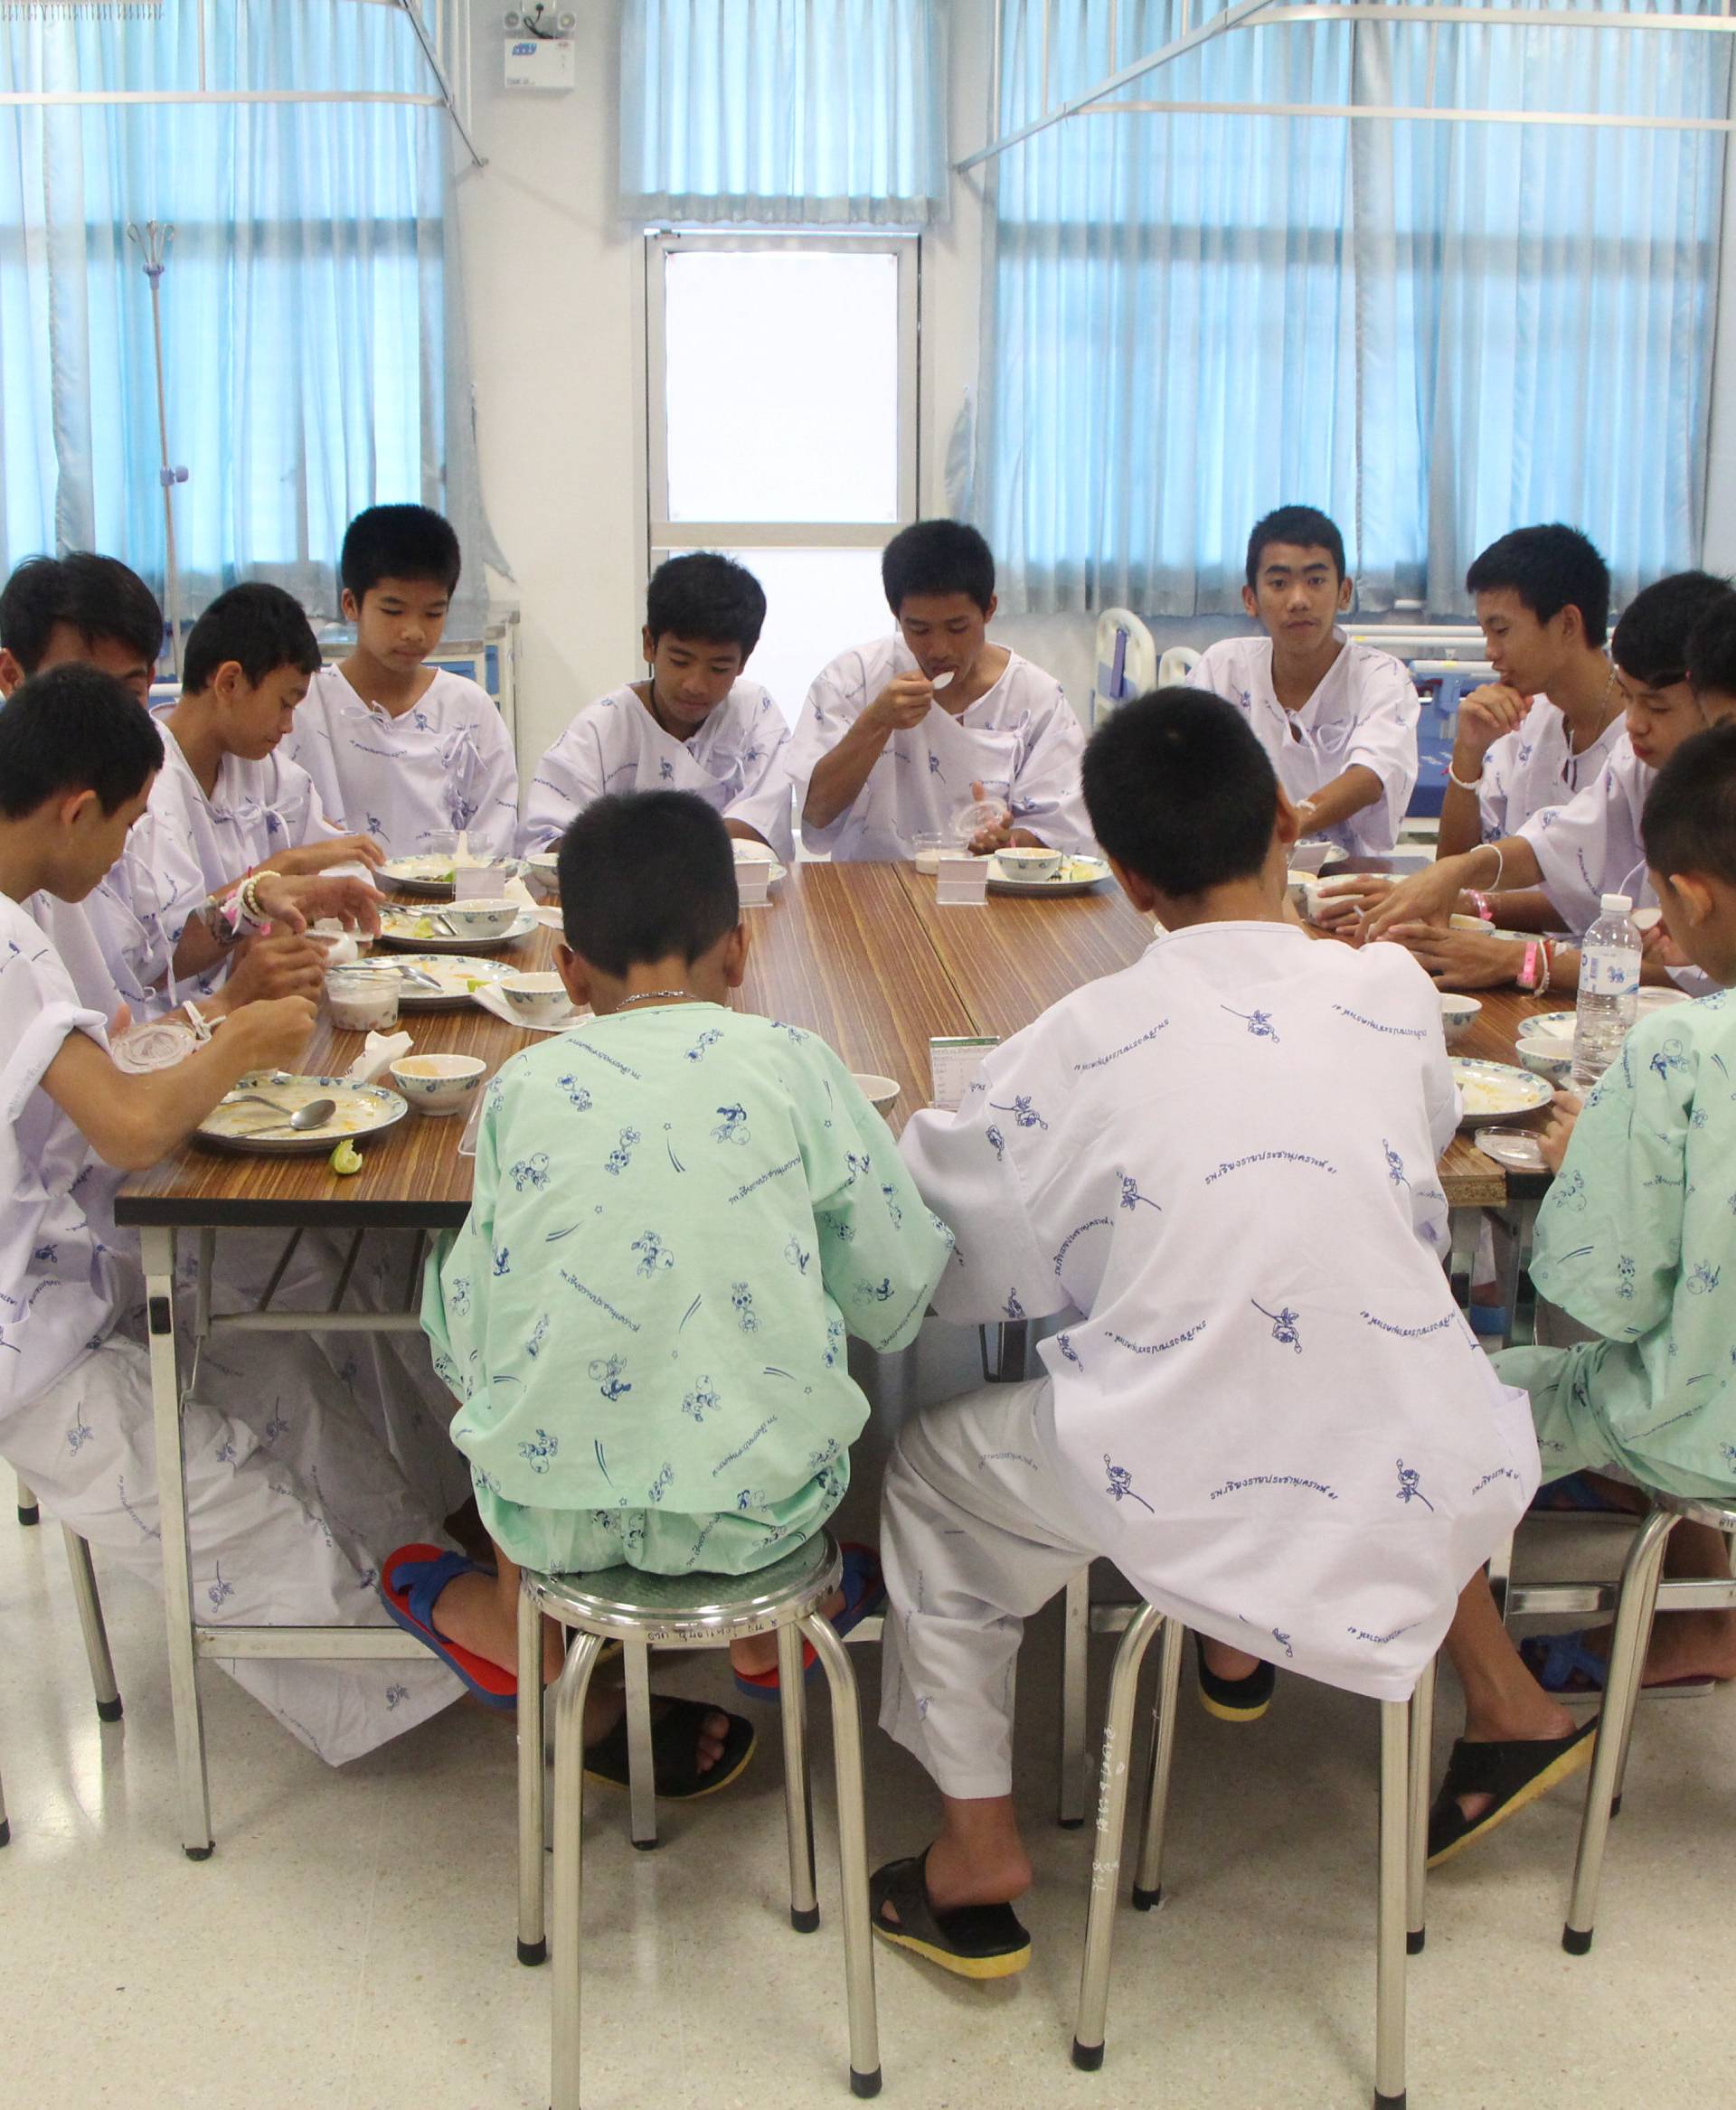 Twelve members of "Wild Boars" soccer team and their coach rescued from a flooded cave eat at the Chiang Rai Prachanukroh Hospital, in Chiang Rai